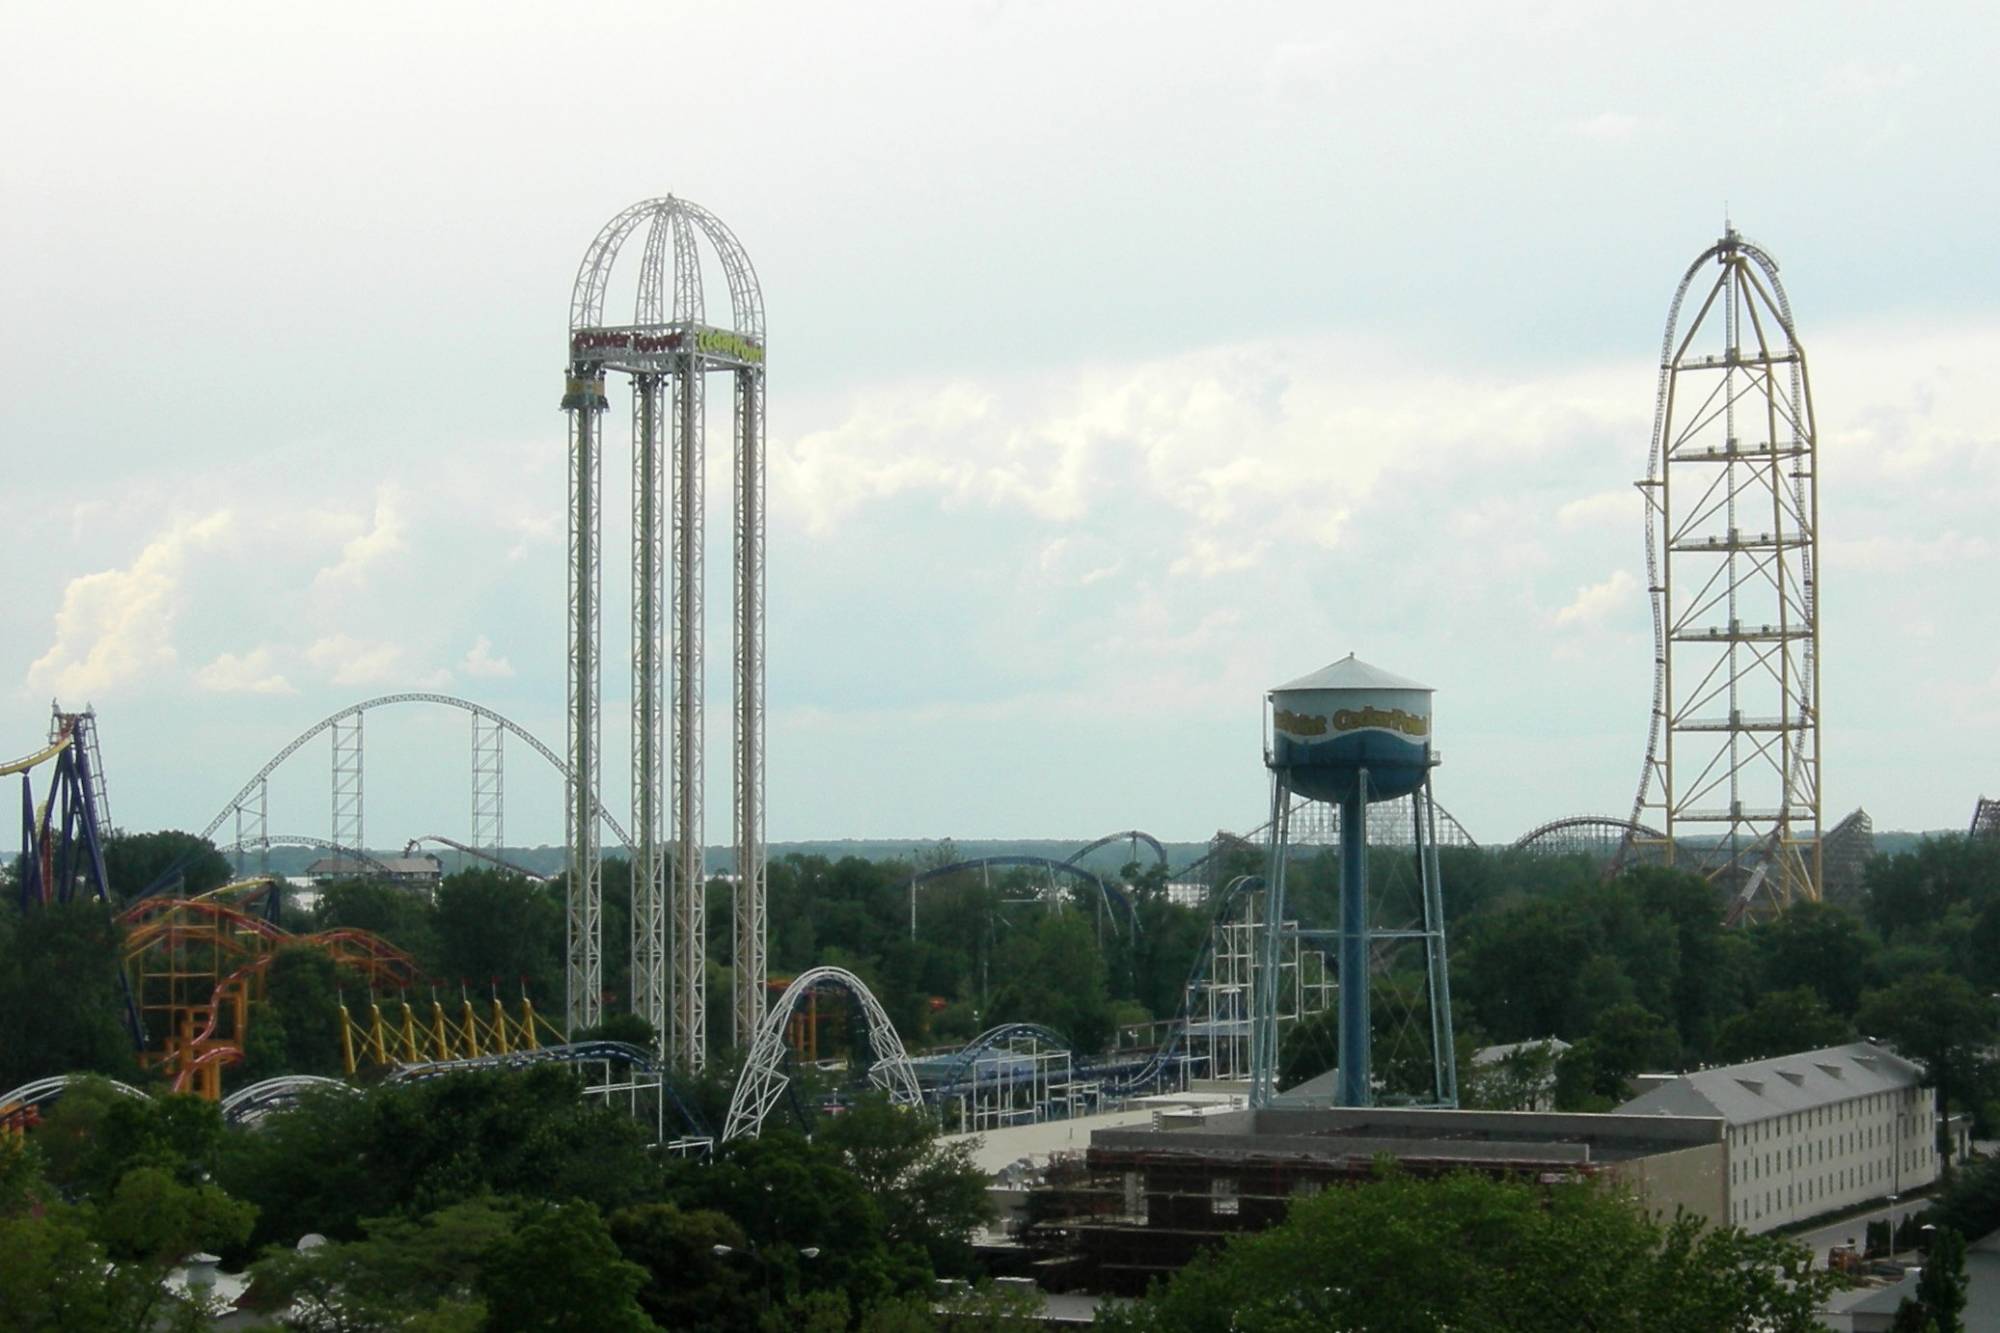 Views of Cedar Point from Giant Wheel